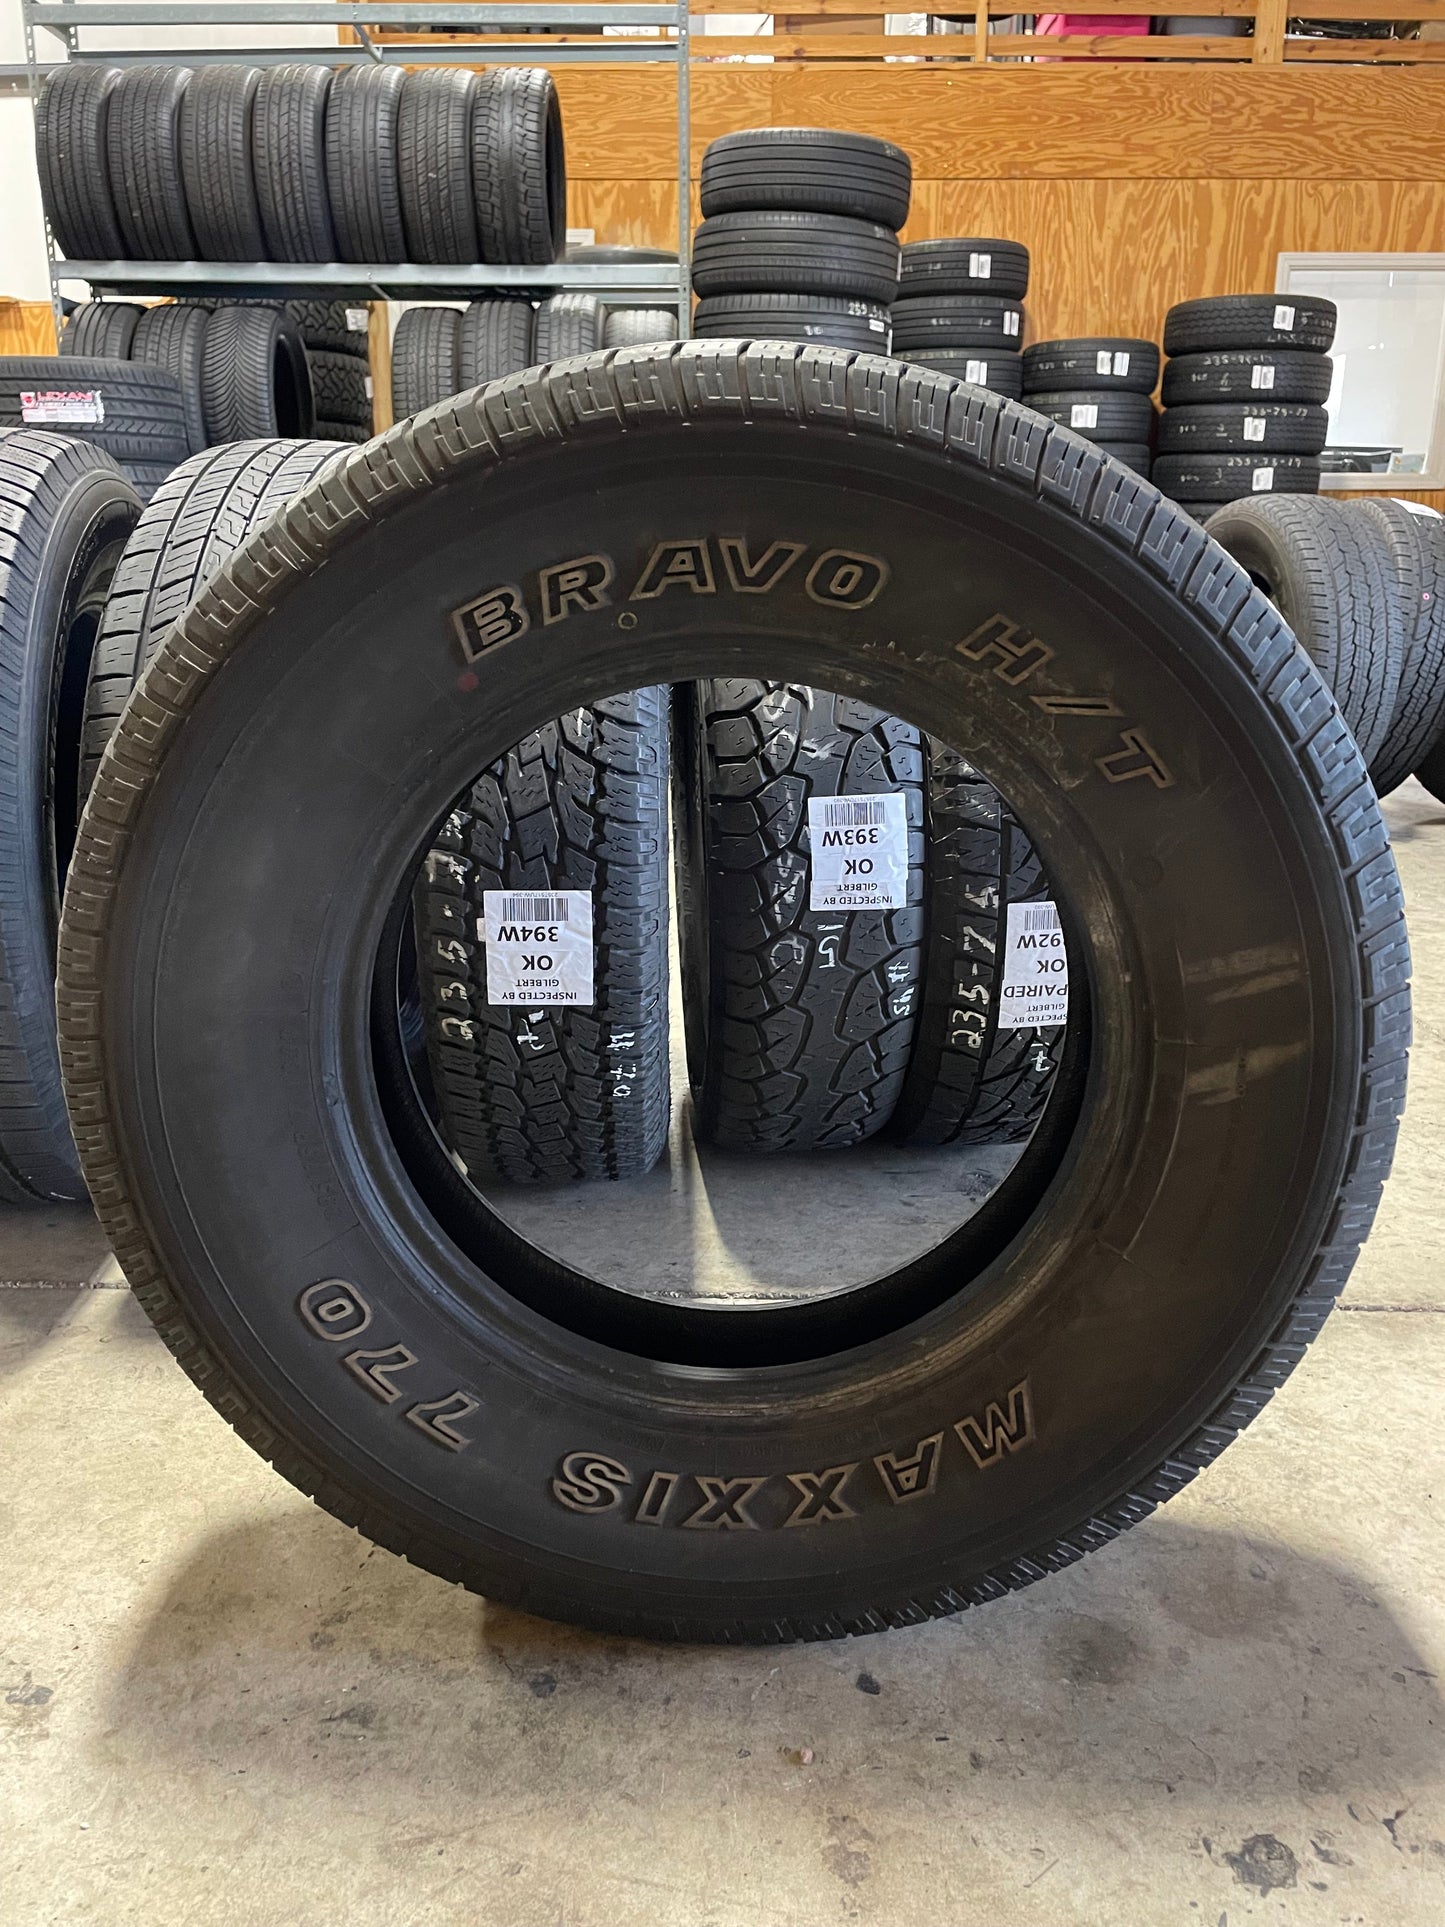 SINGLE 235/75R17 Maxxis Bravo H/T 770 109 S SL - Used Tires